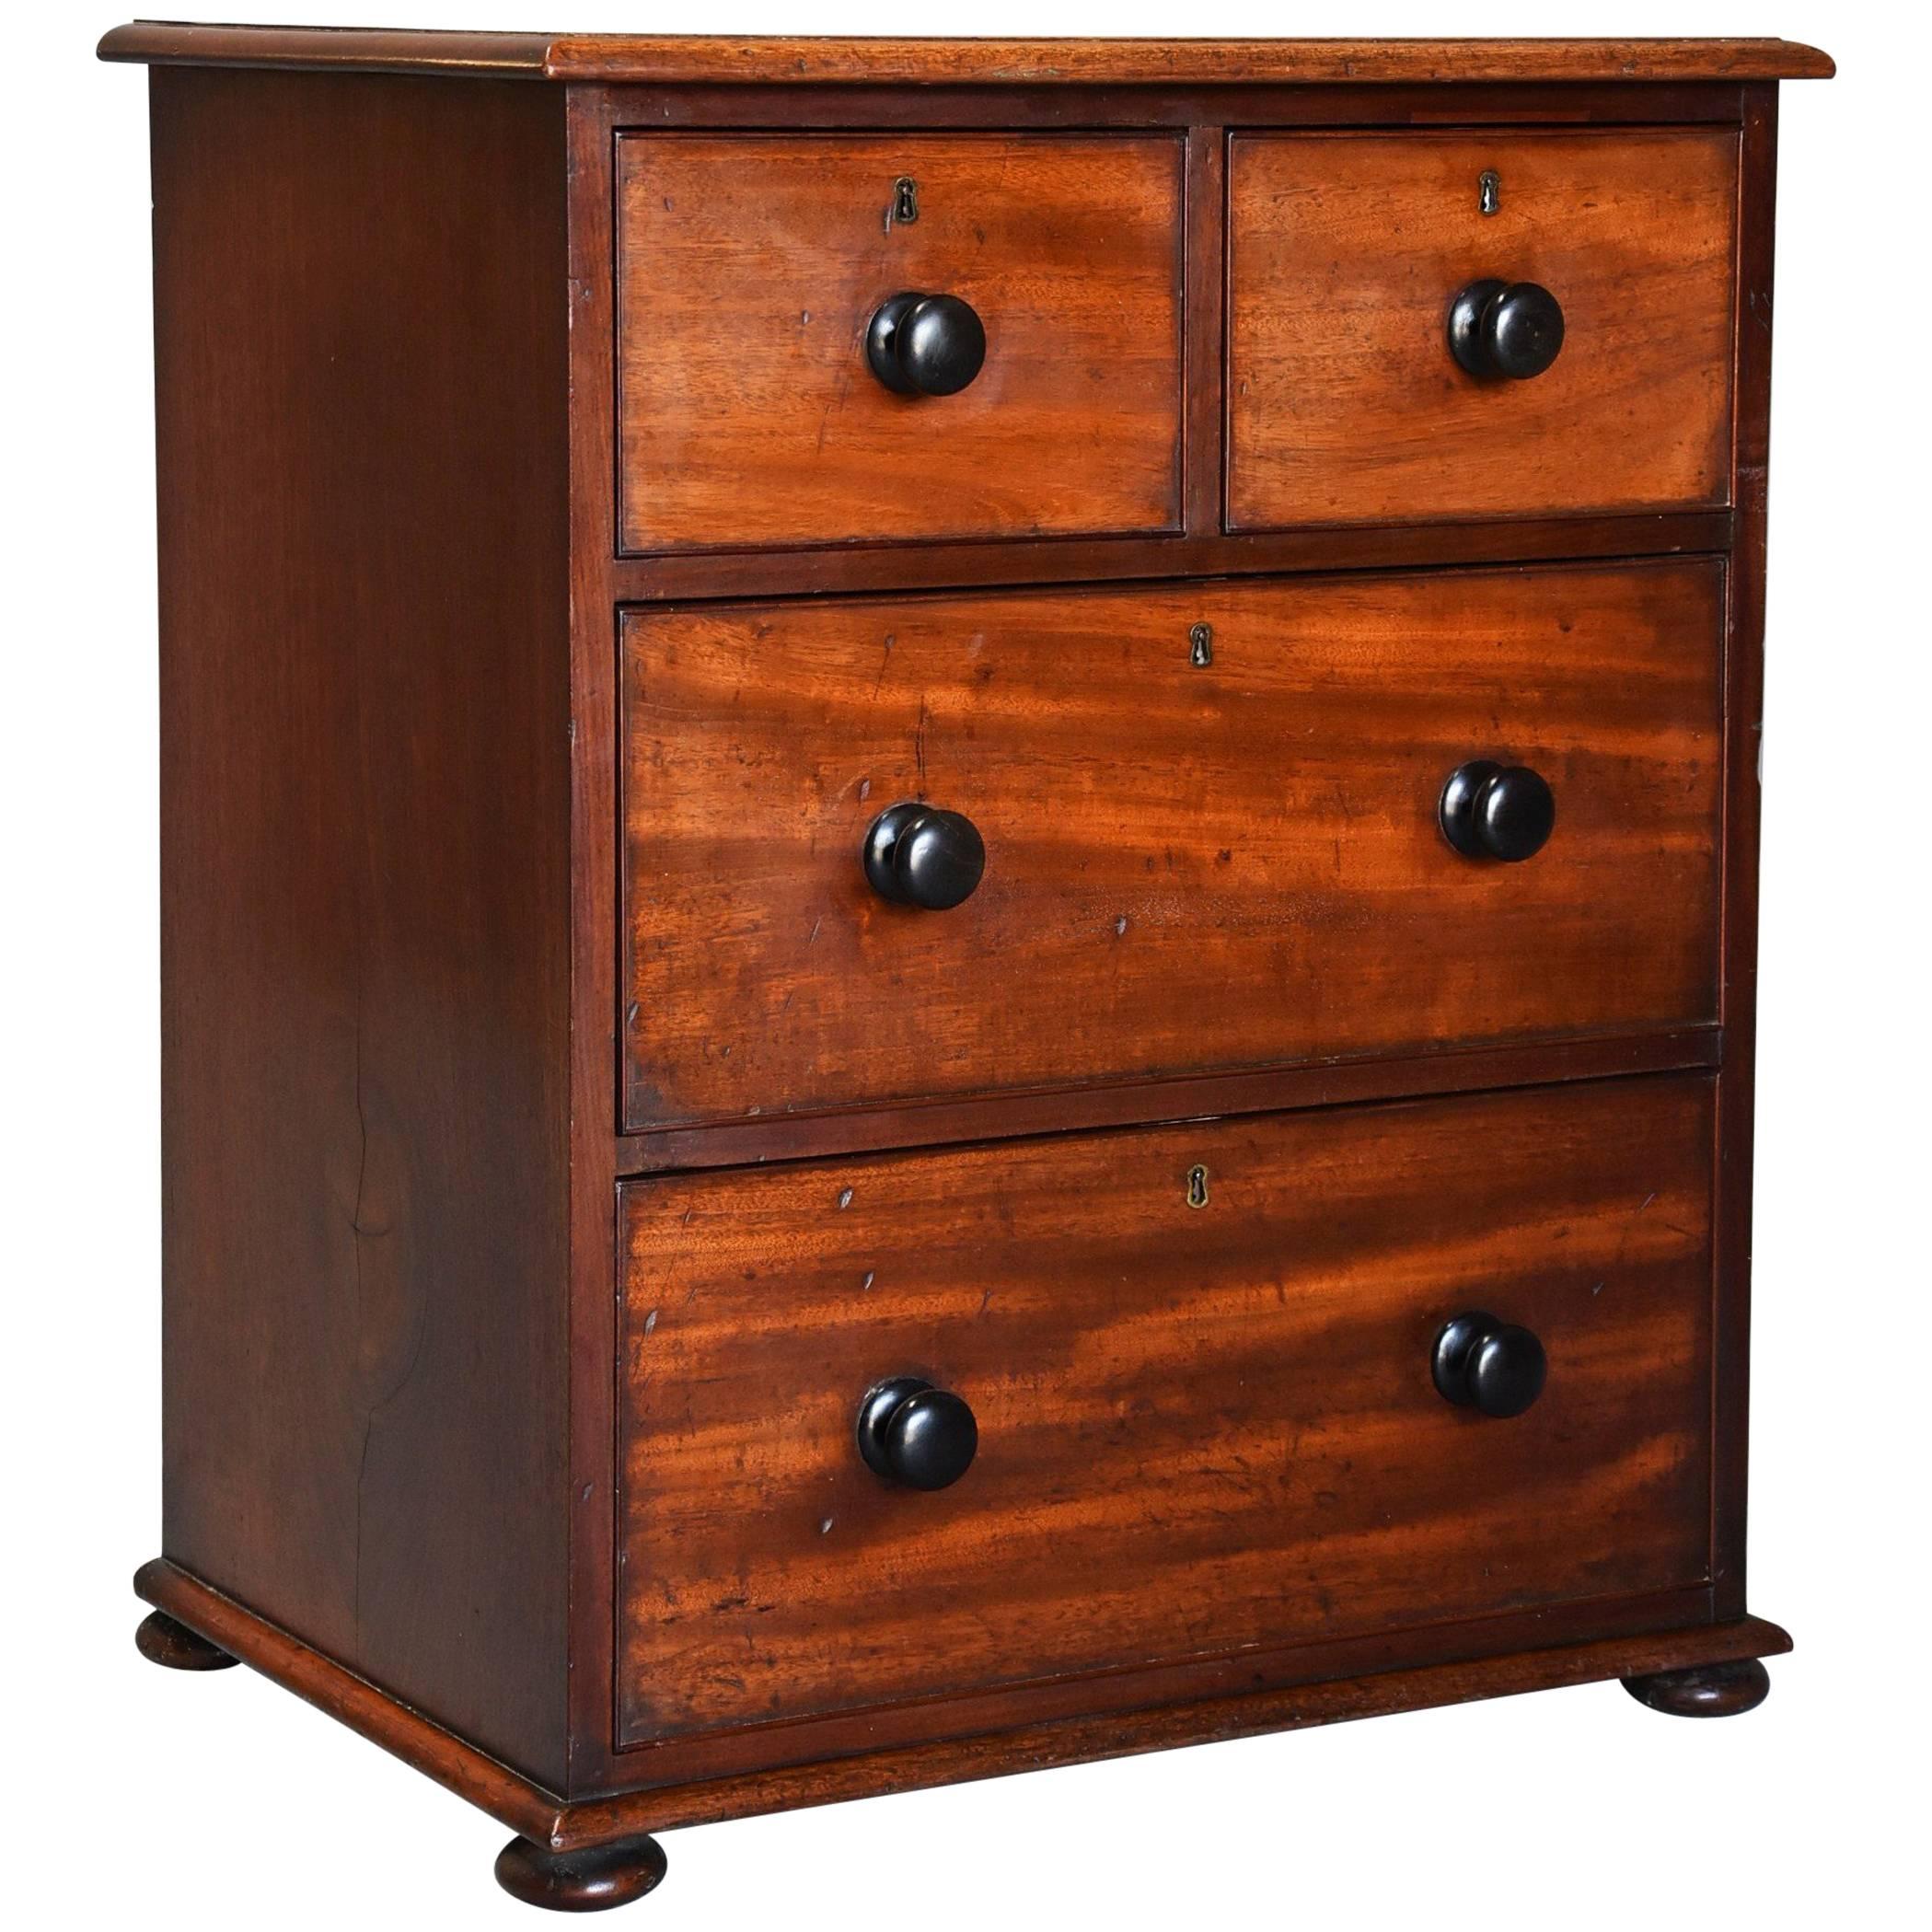 Small Mid-19th Century Mahogany Chest of Drawers with Superb Patina For Sale